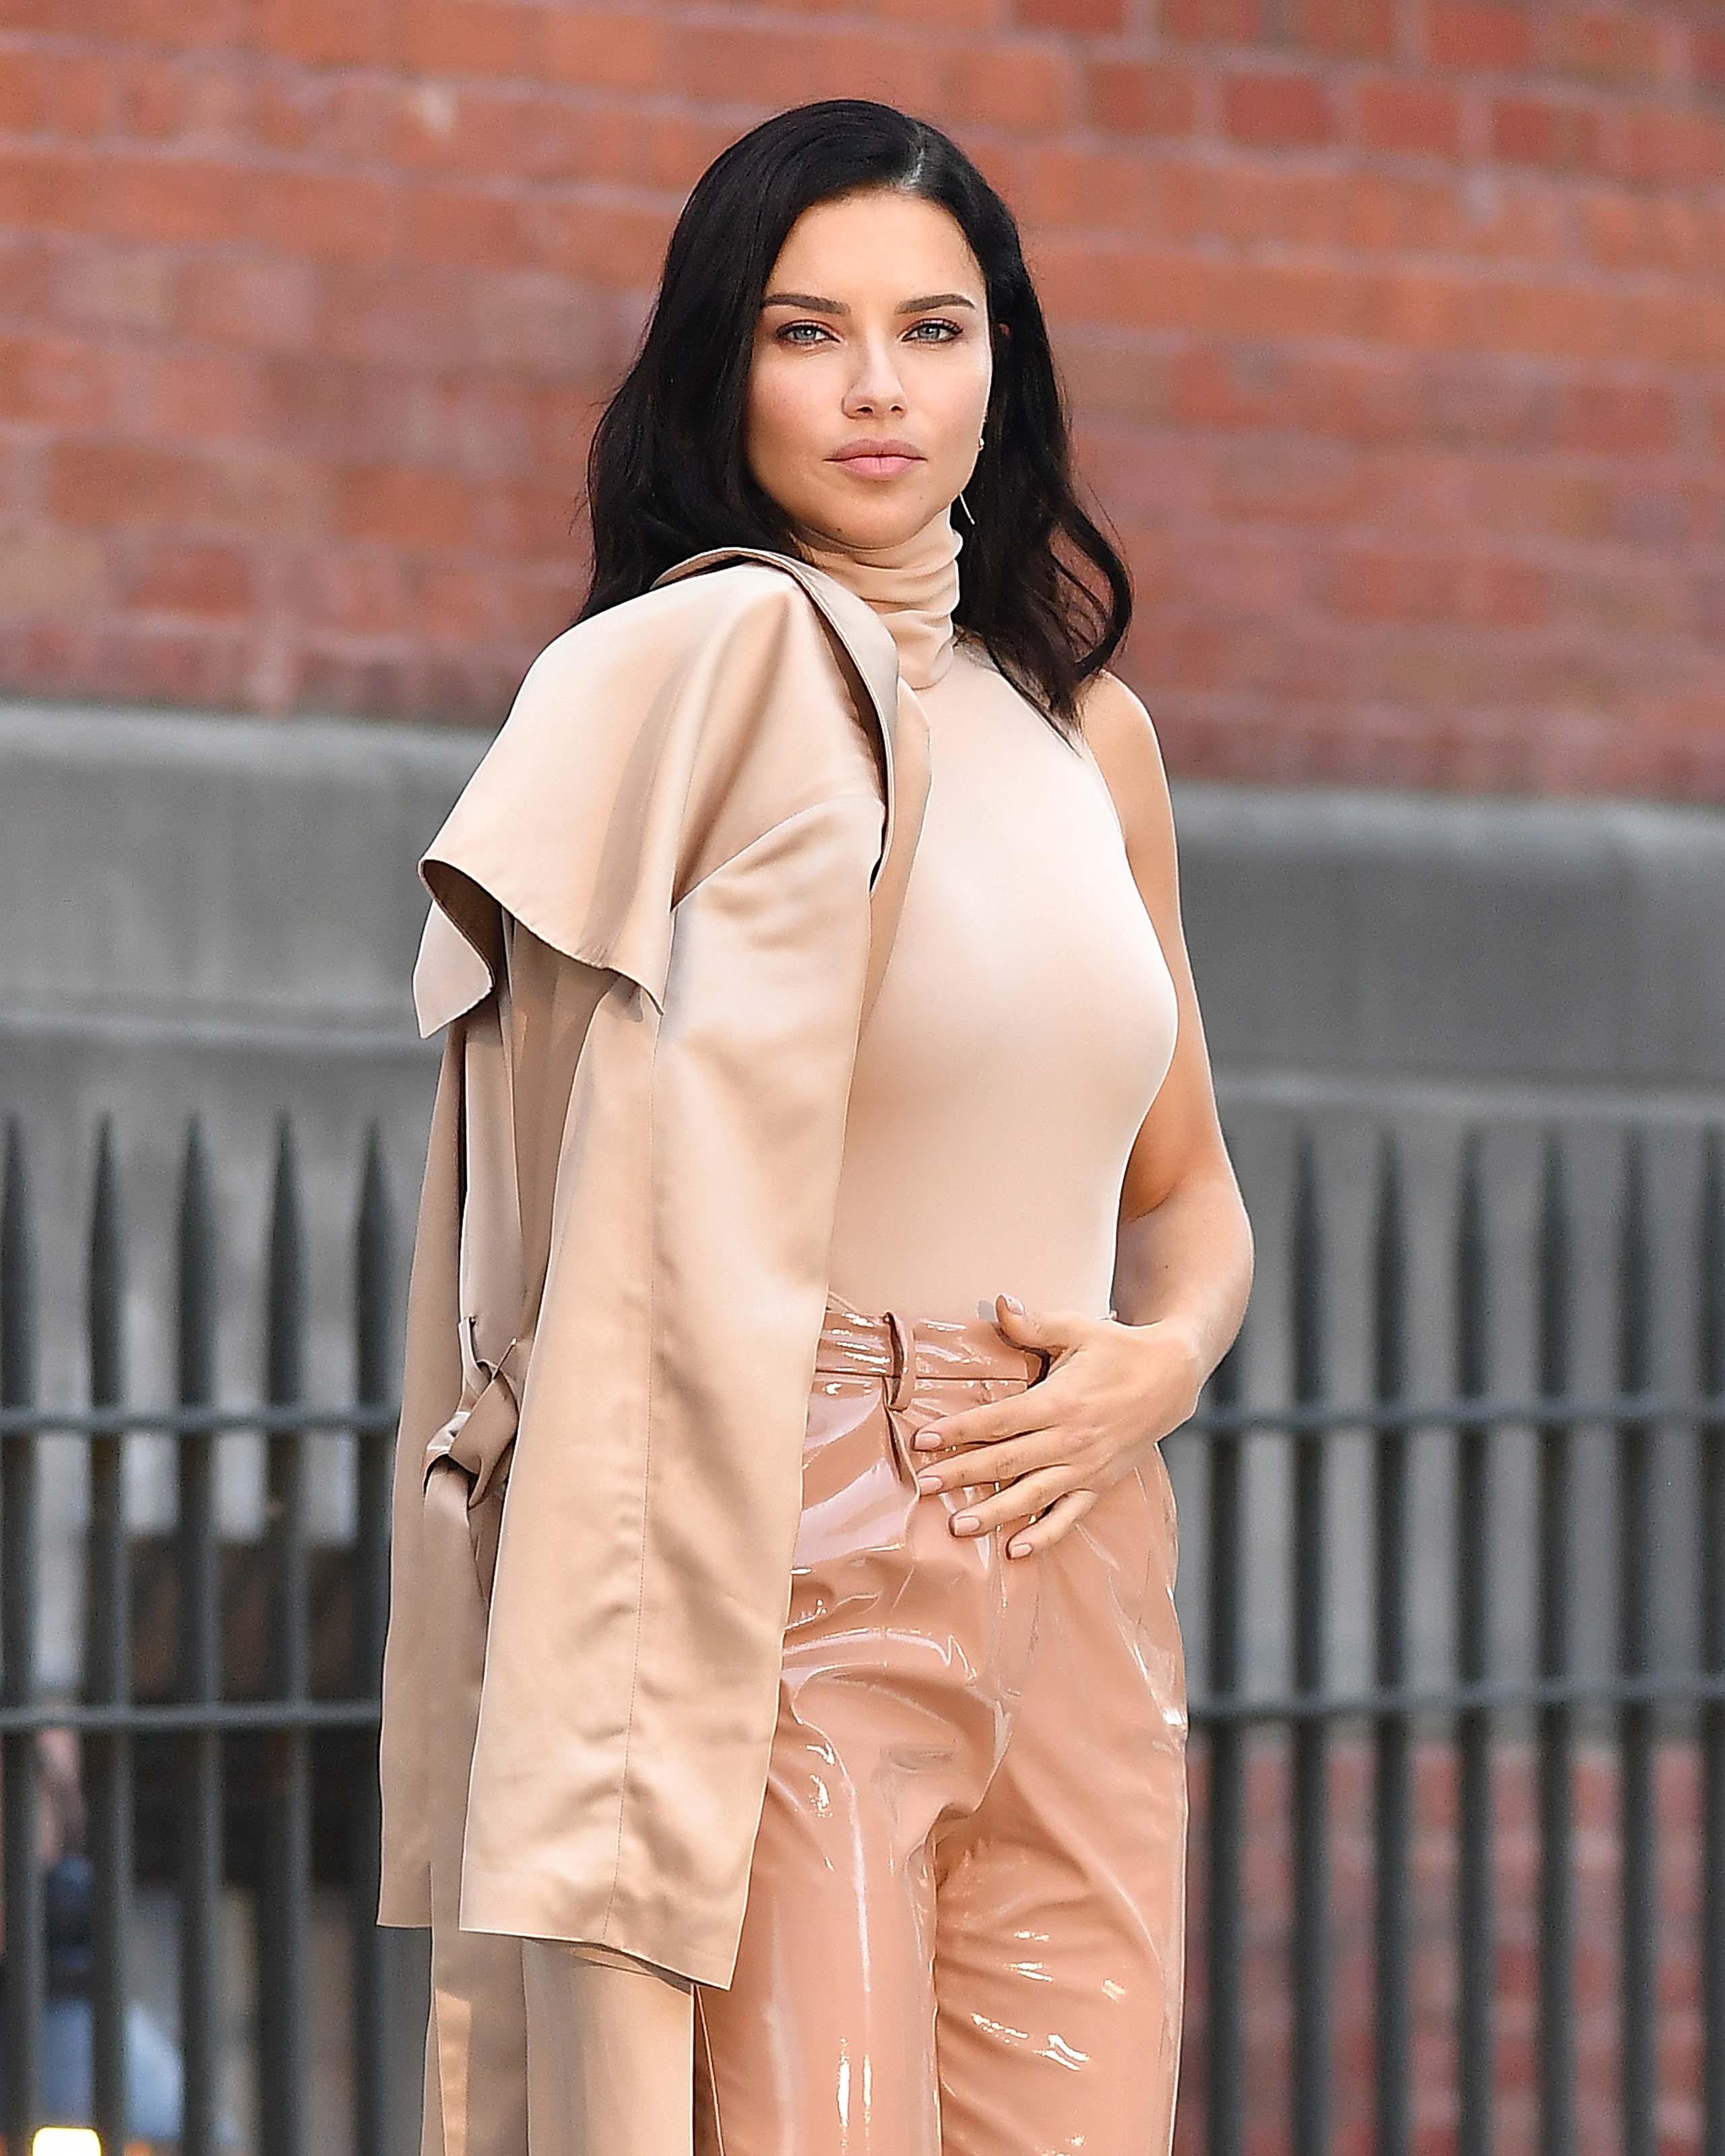 Adriana Lima spotted on a video shoot